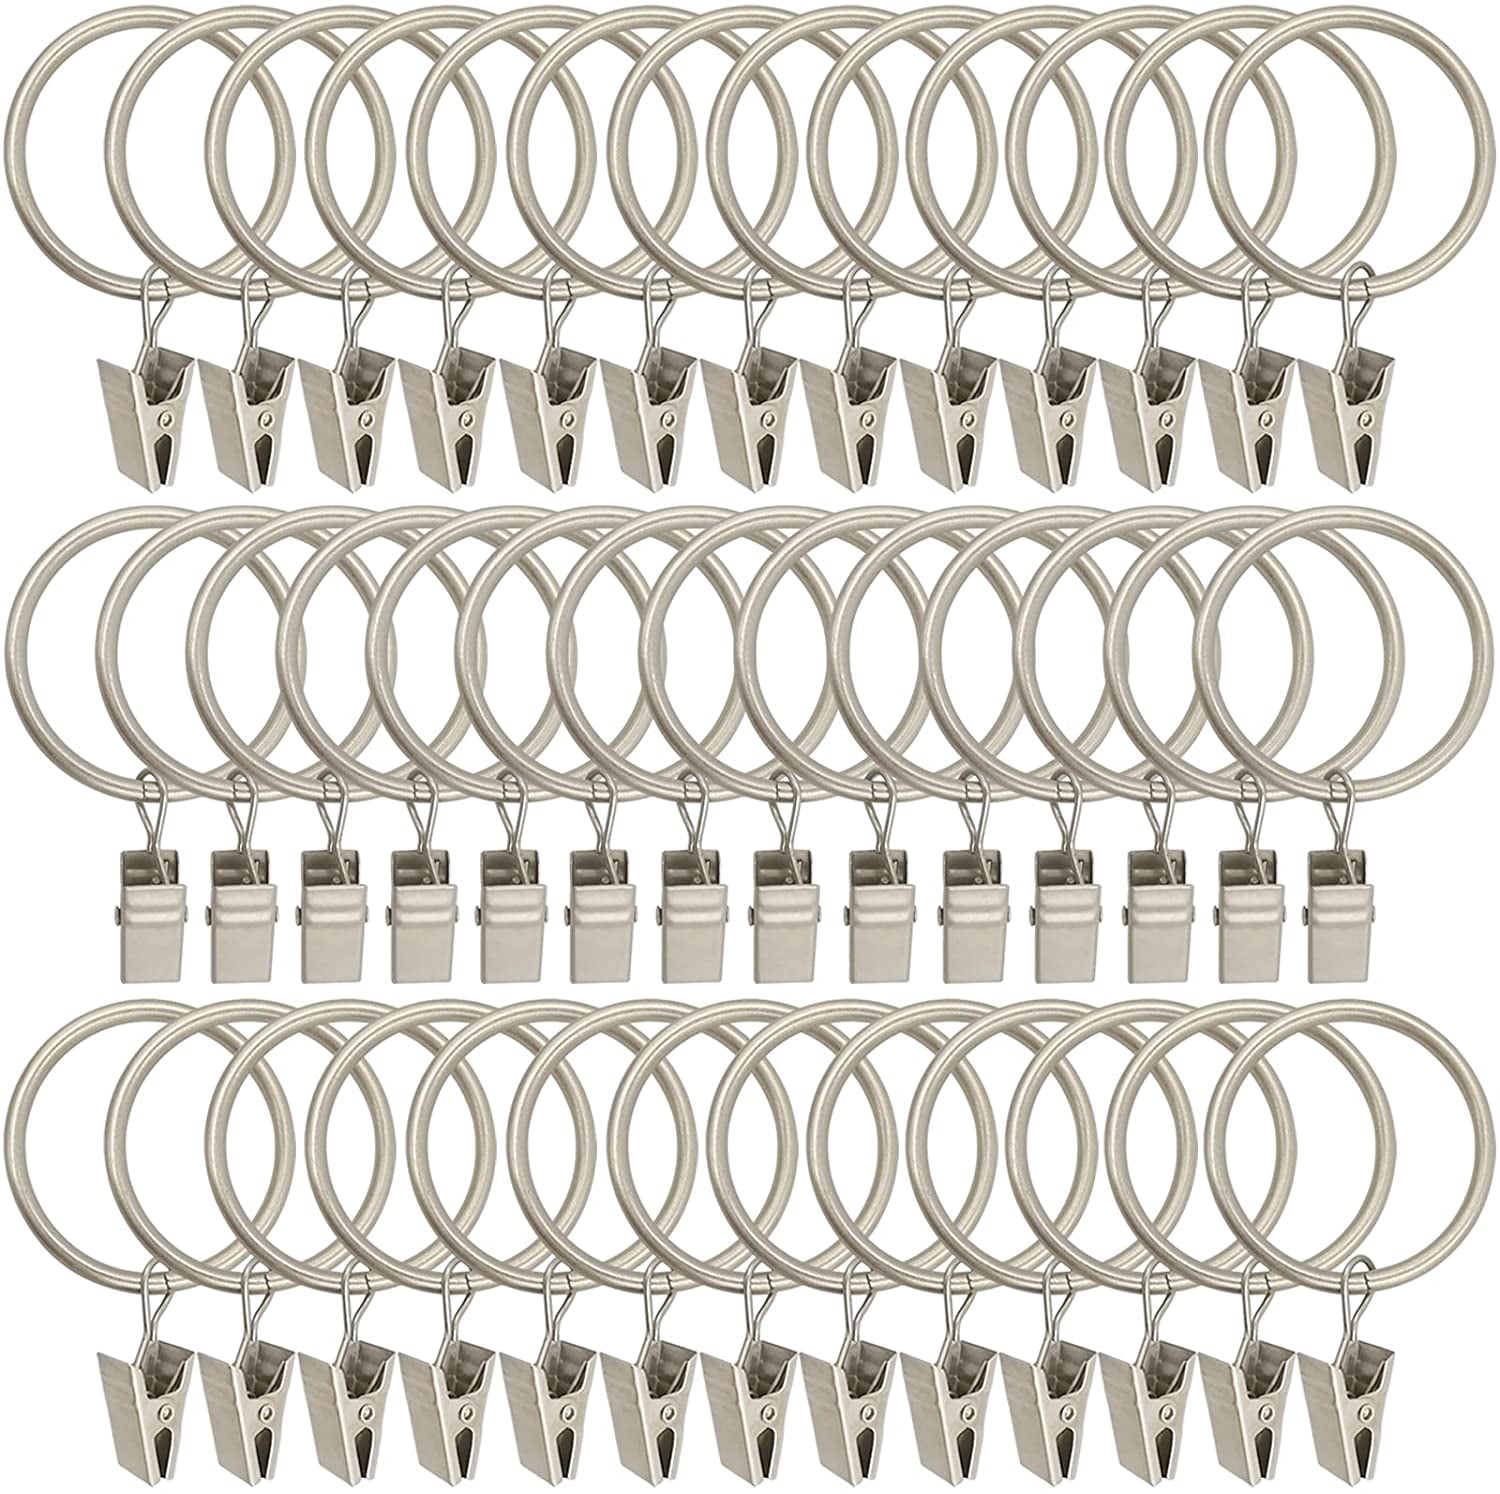 10 pack of 1" ROUND Brass Plated CLIP-ON Slide CAFE RINGS Pinch-On HOLDS TIGHT! 